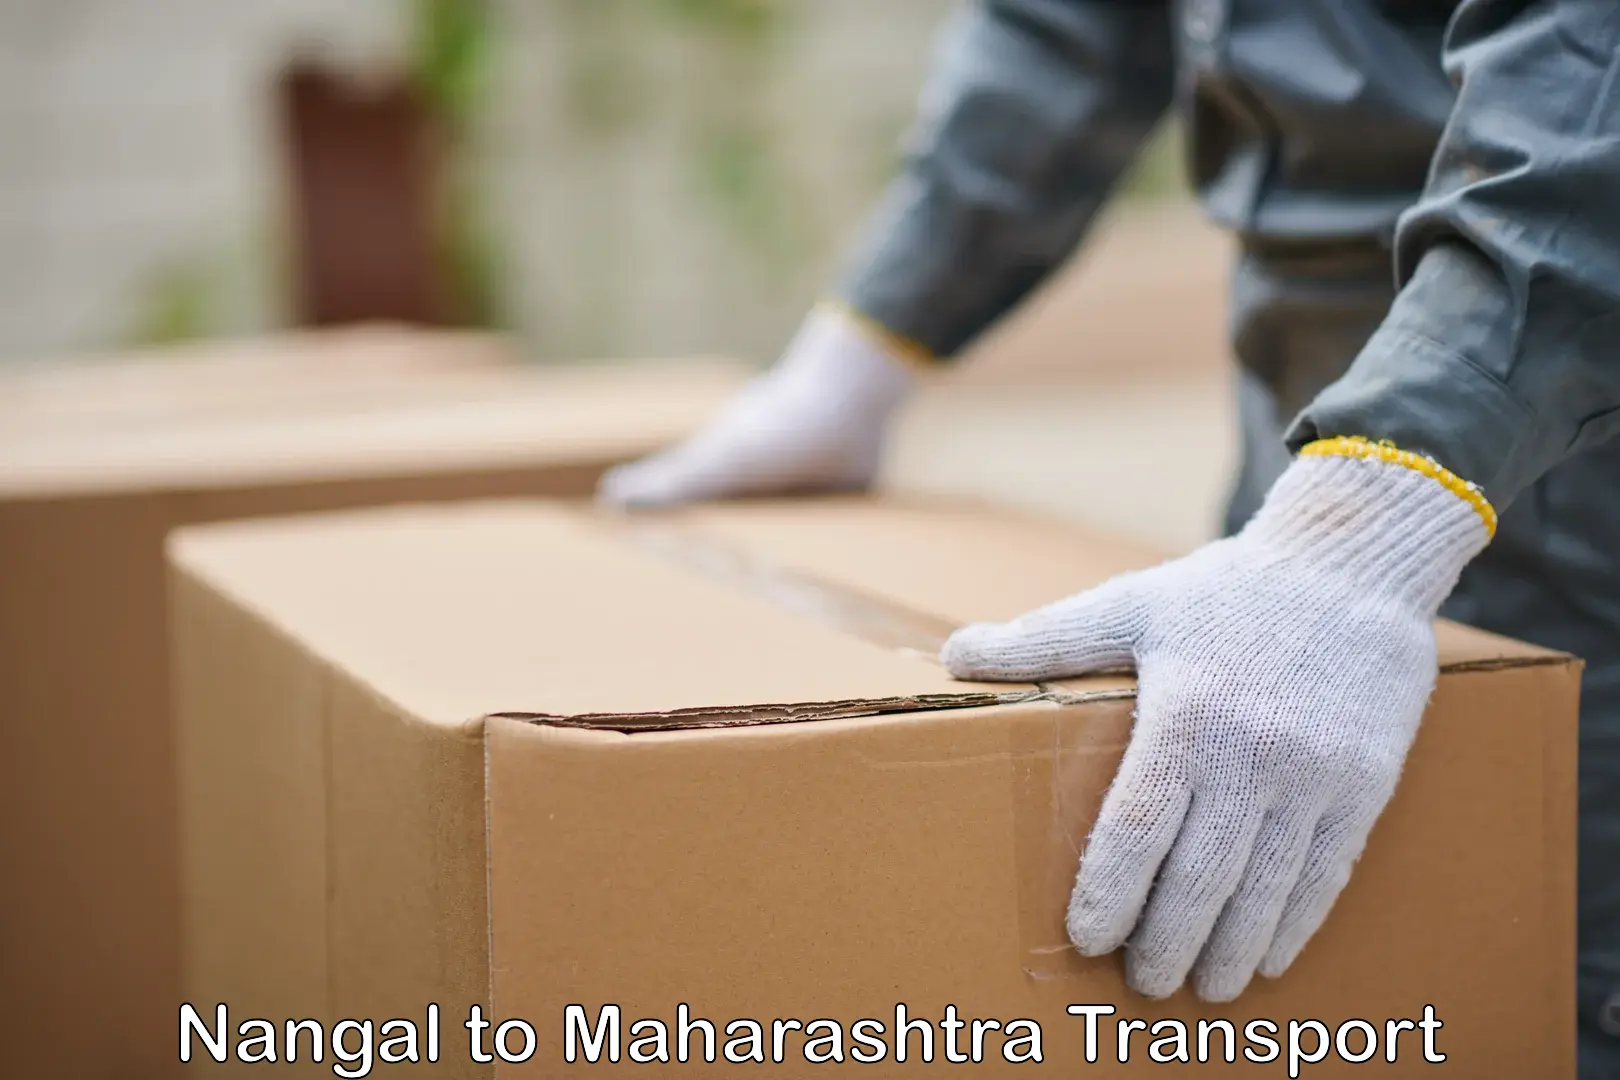 Transport bike from one state to another in Nangal to Maharashtra